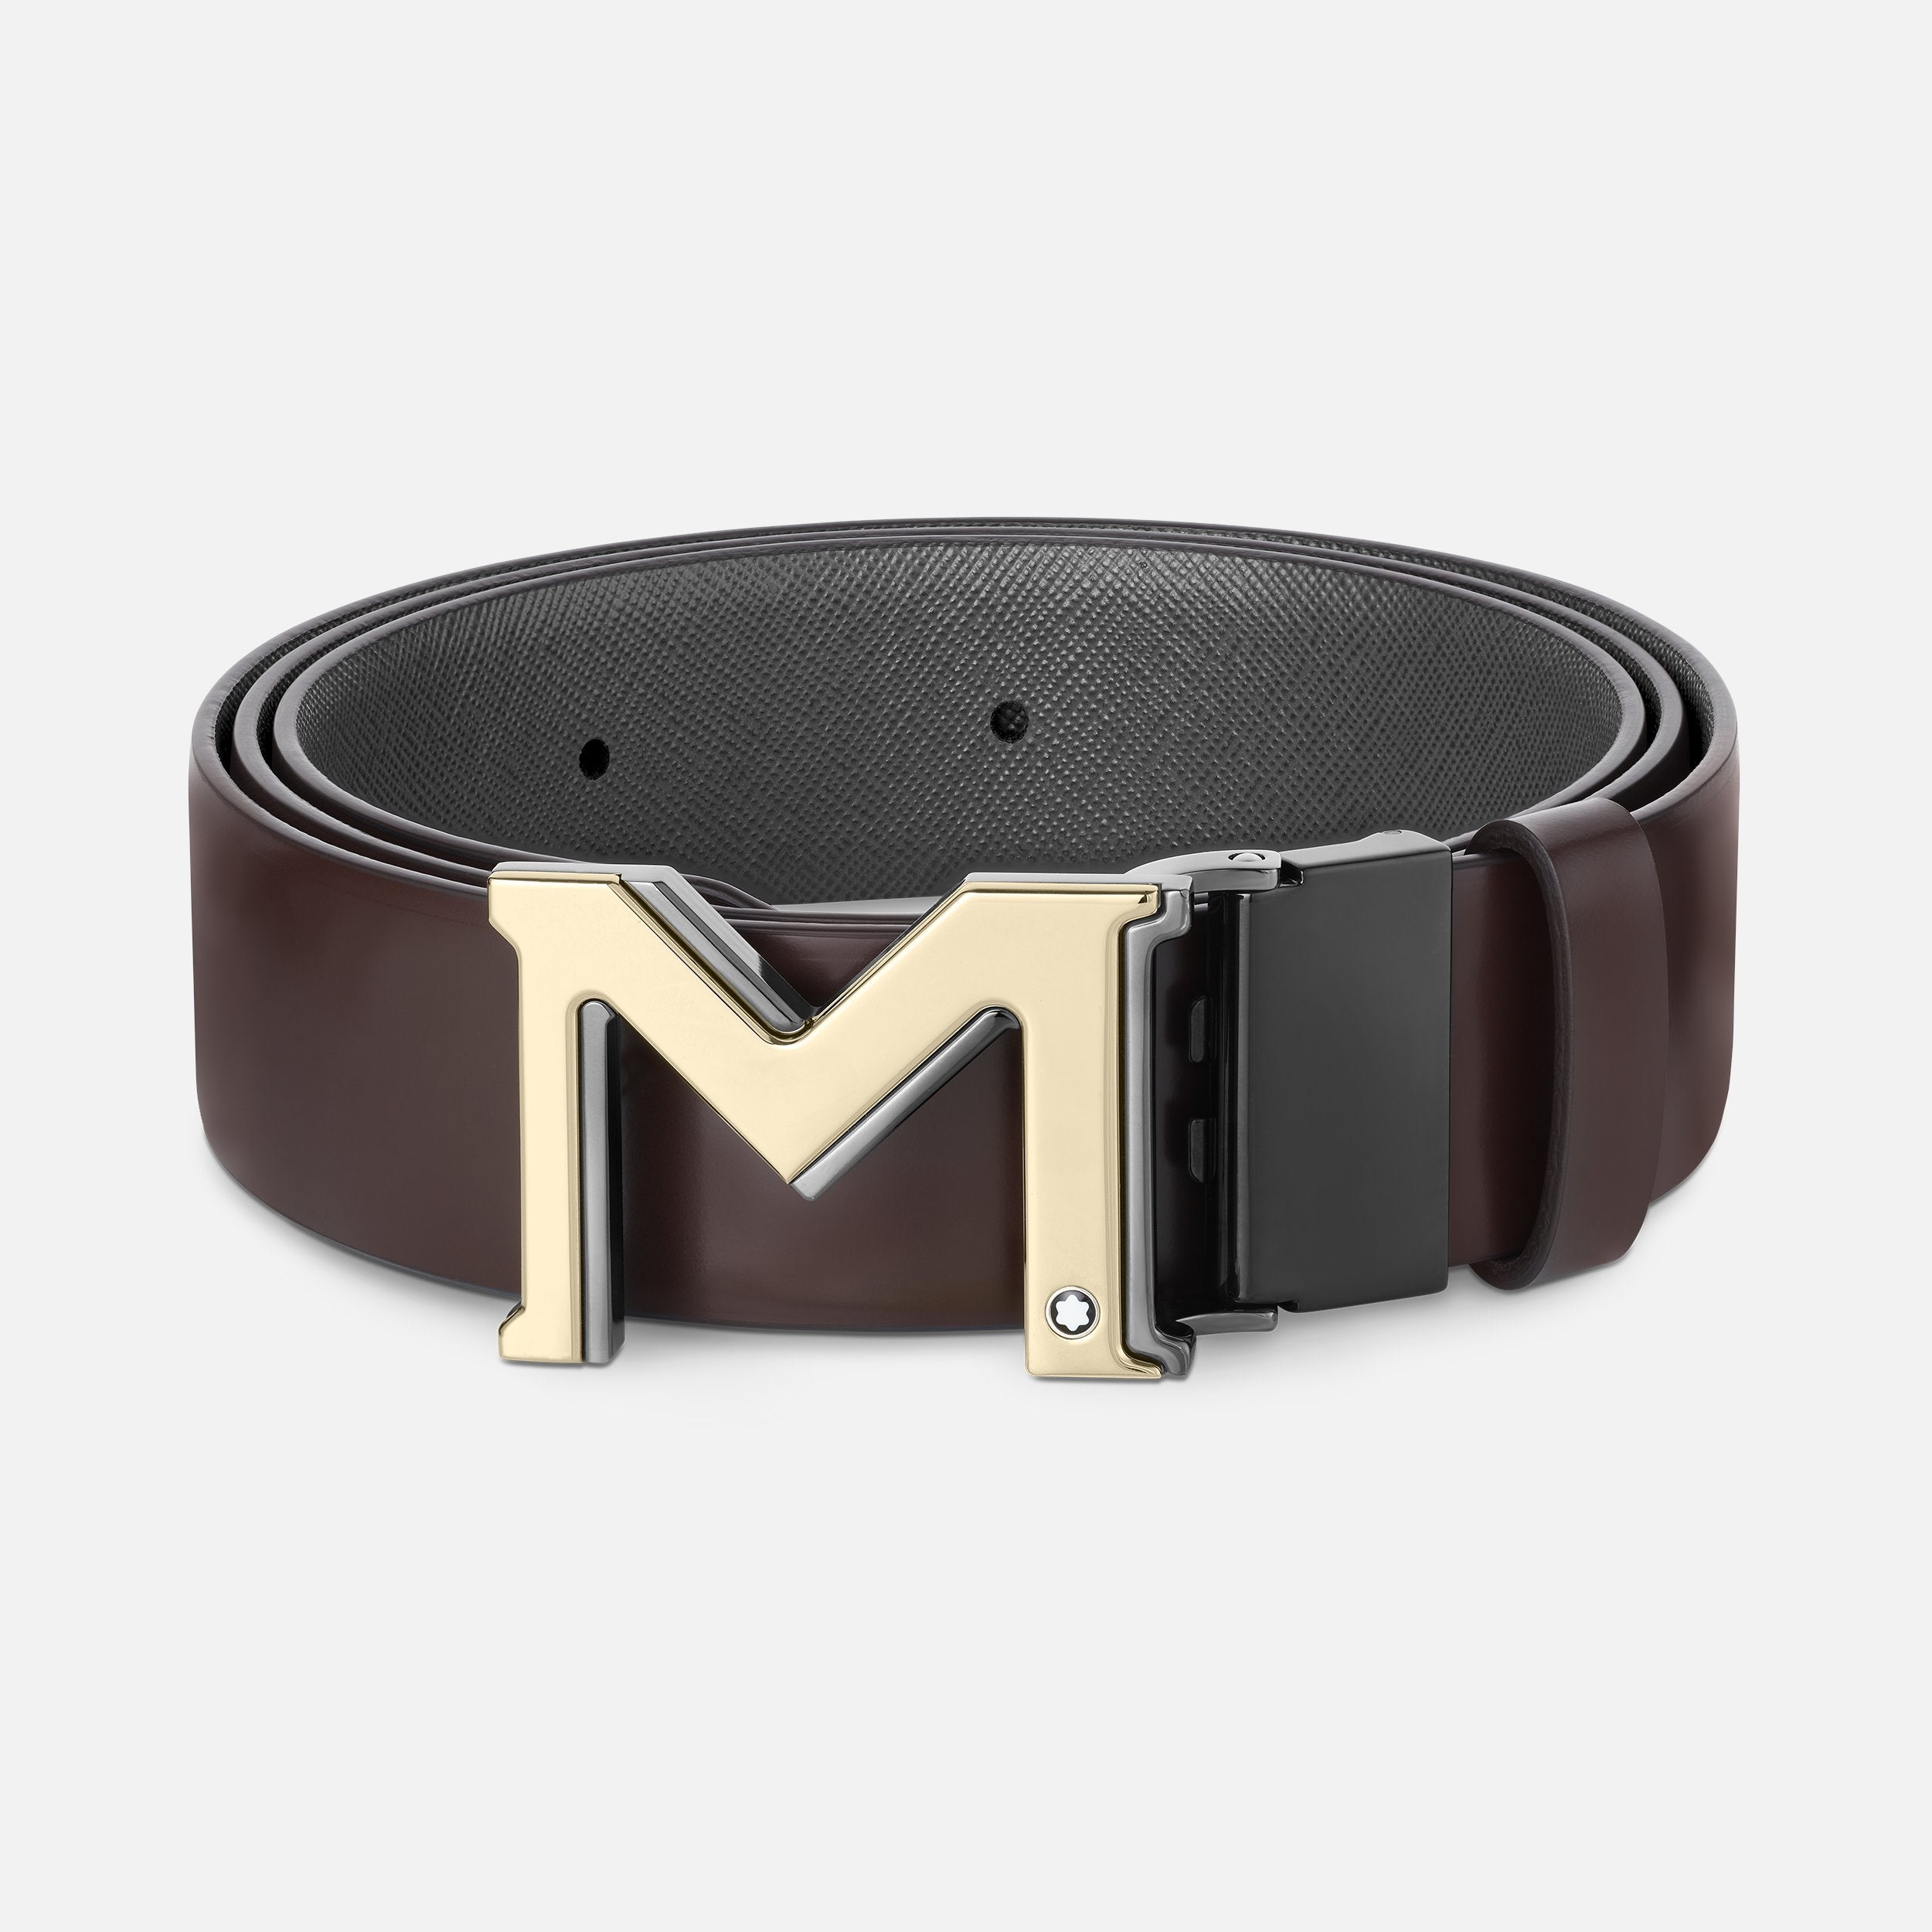 M BUCKLE BROWN/GRAY 35 MM REVERSIBLE LEATHER BELT-MB131177